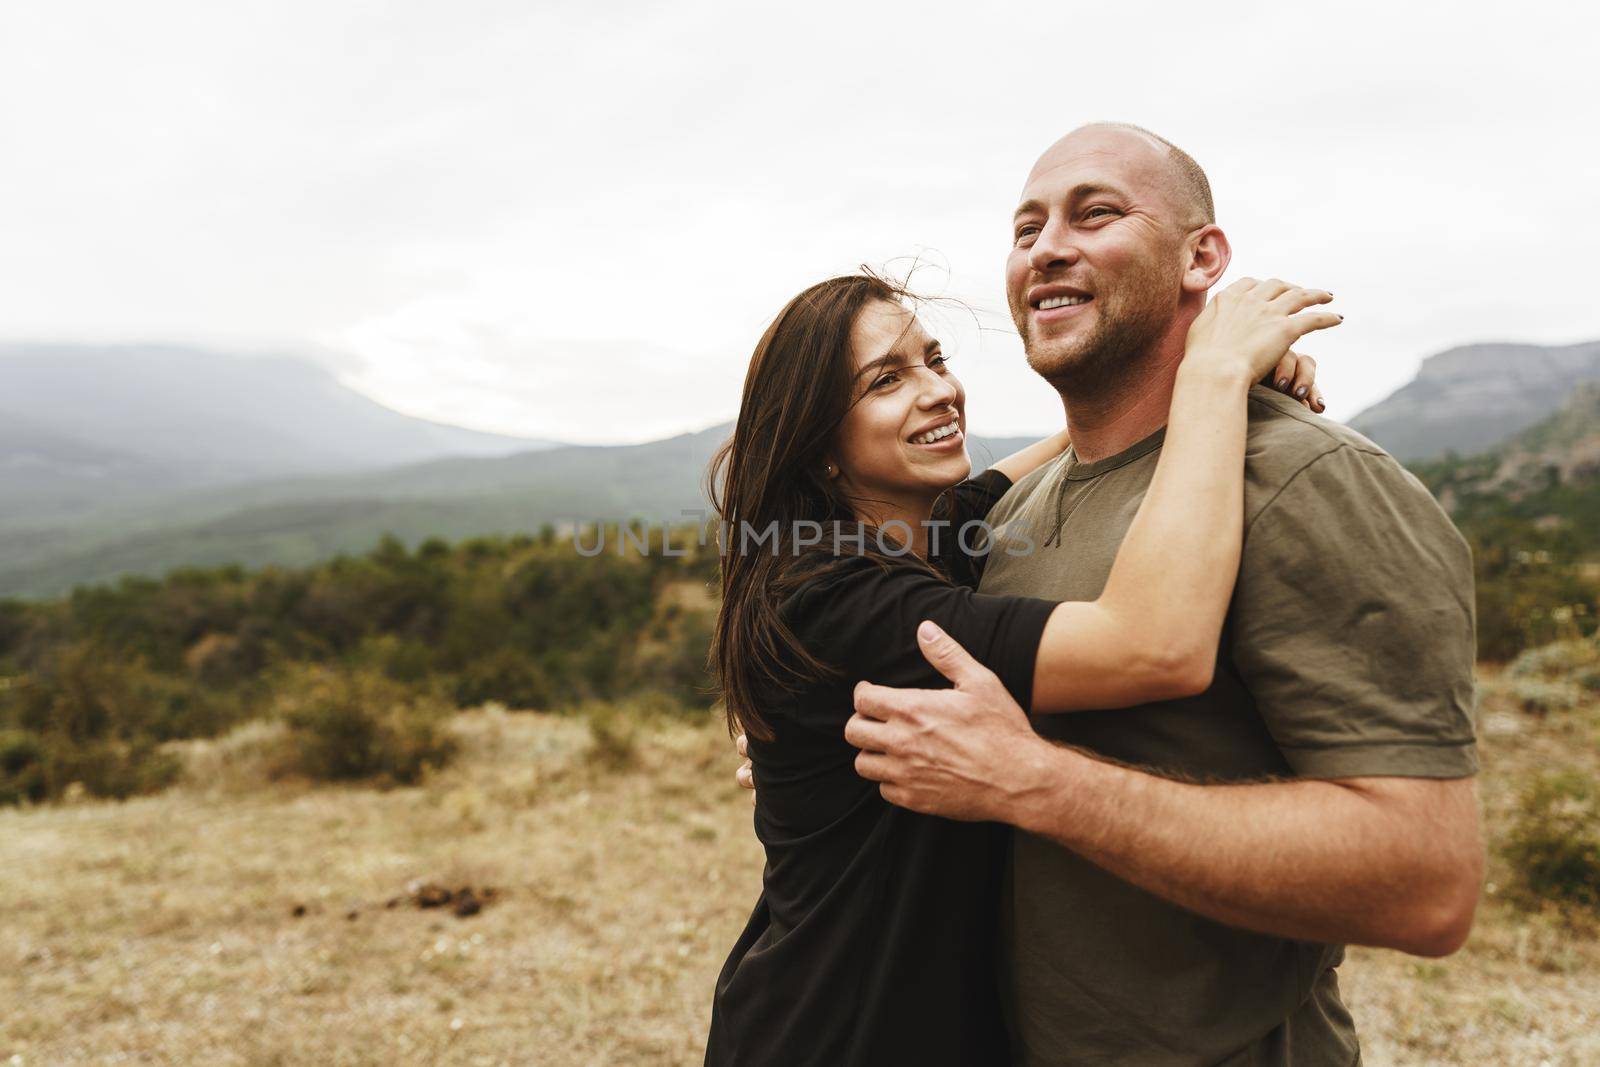 Happy couple in love hugging smiling and having fun in the mountains on foggy day